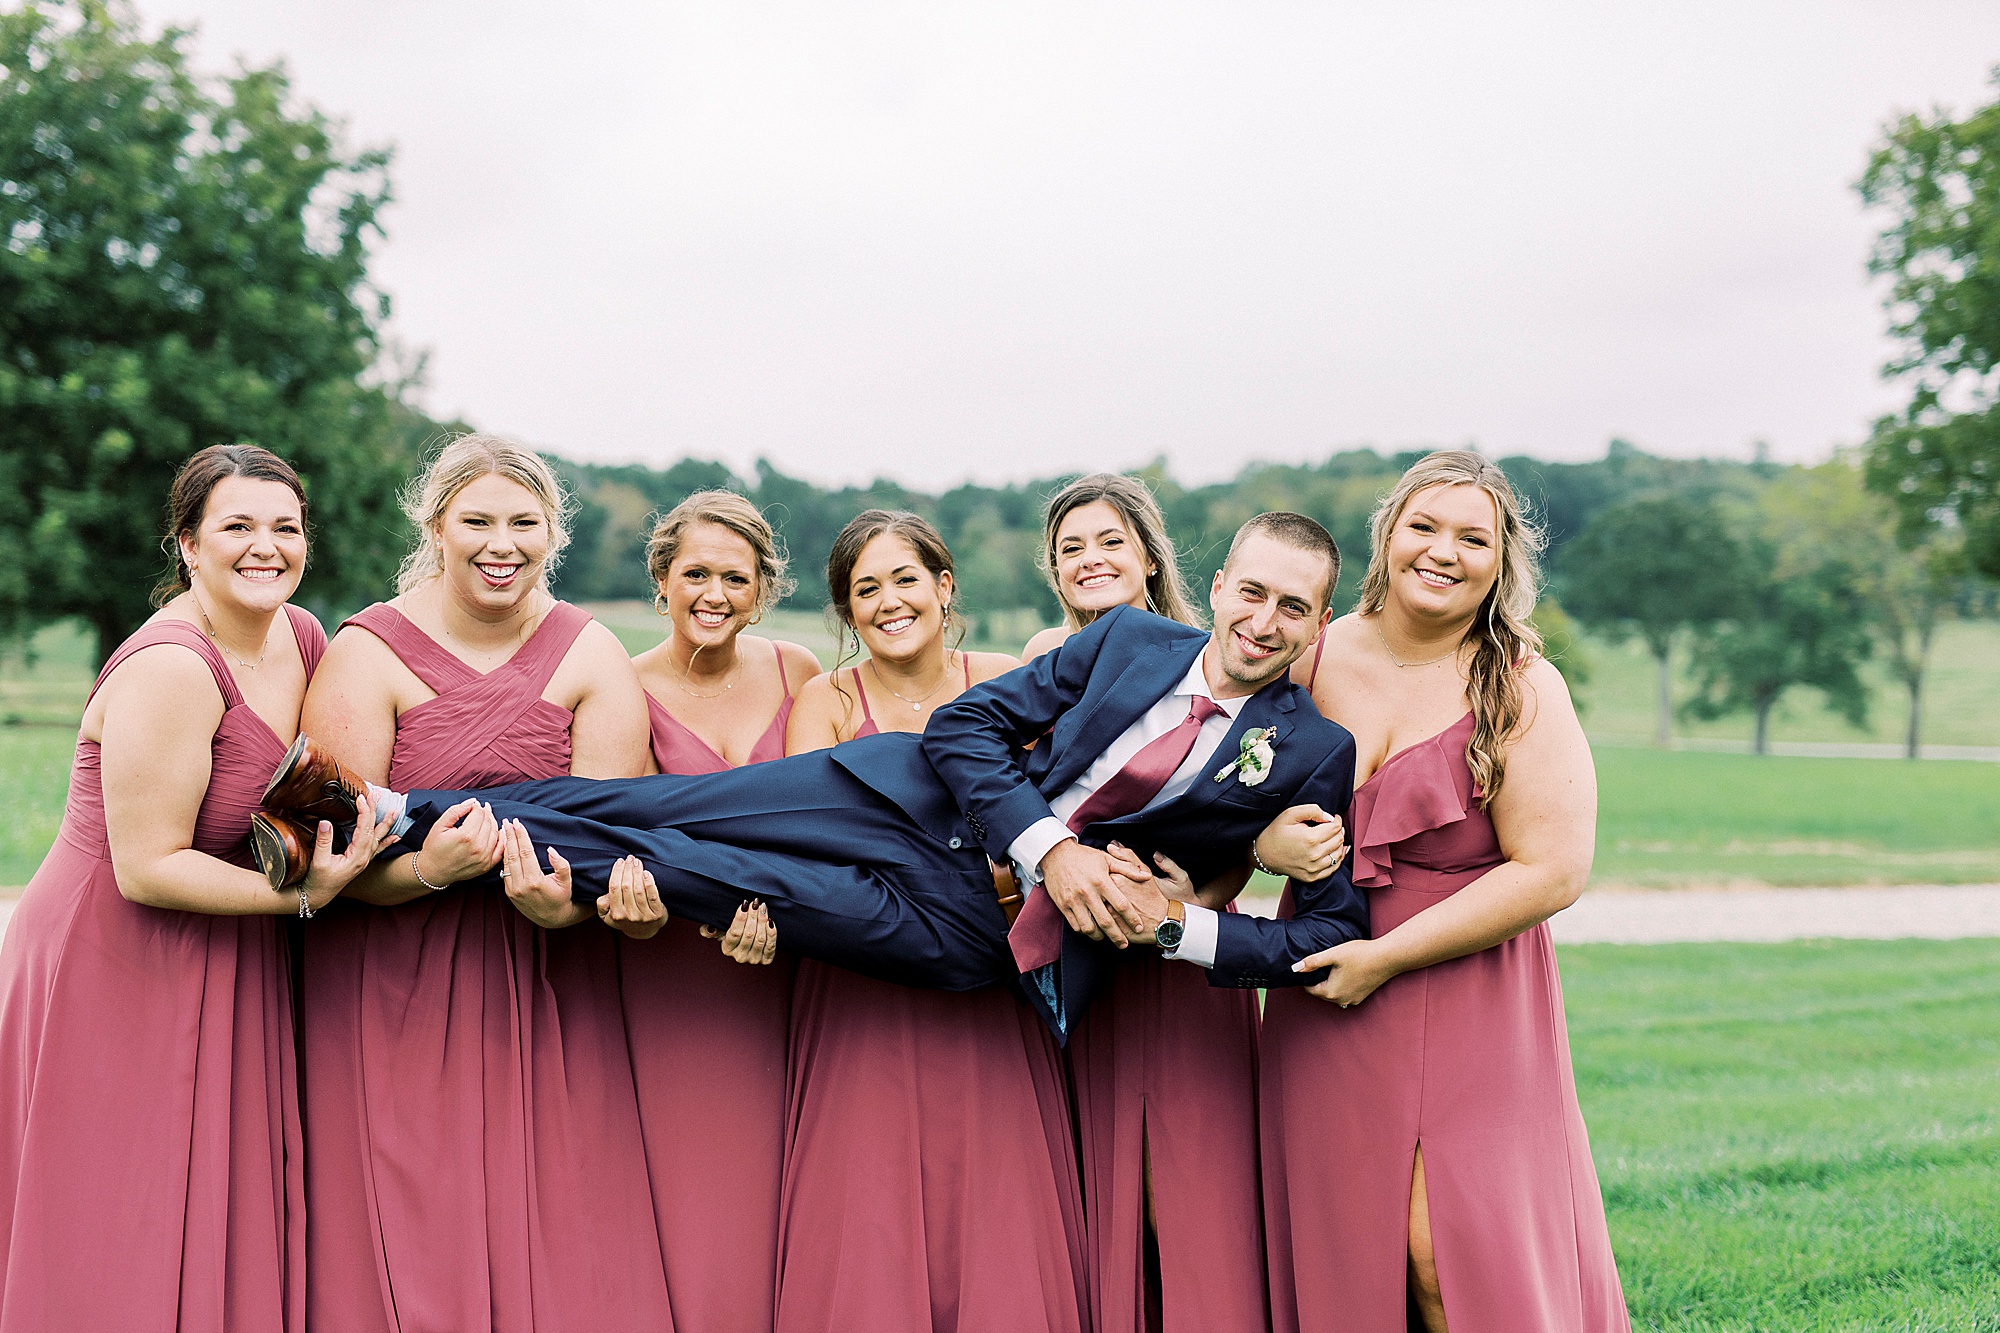 bridesmaids lift groom up during wedding party portraits